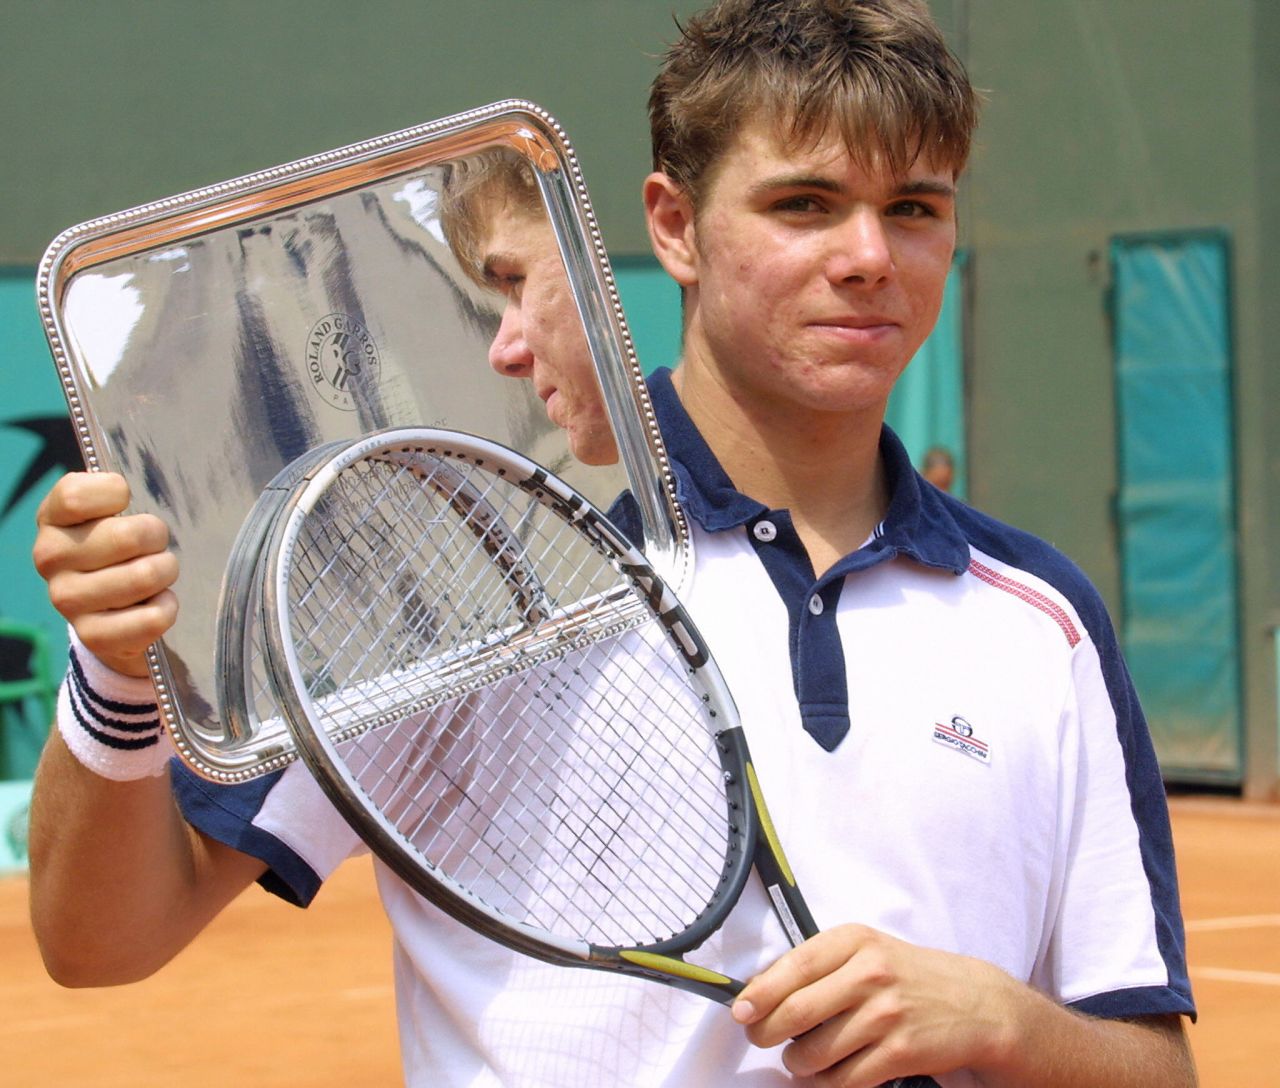 Wawrinka won the 2003 French Open boys' title, just after turning 18, as he beat American Brian Baker in straight sets. Stepping up to the adult circuit ranked as the world's 14th-ranked junior, his decision to quit school aged 15 to focus on his tennis career seemed justified.